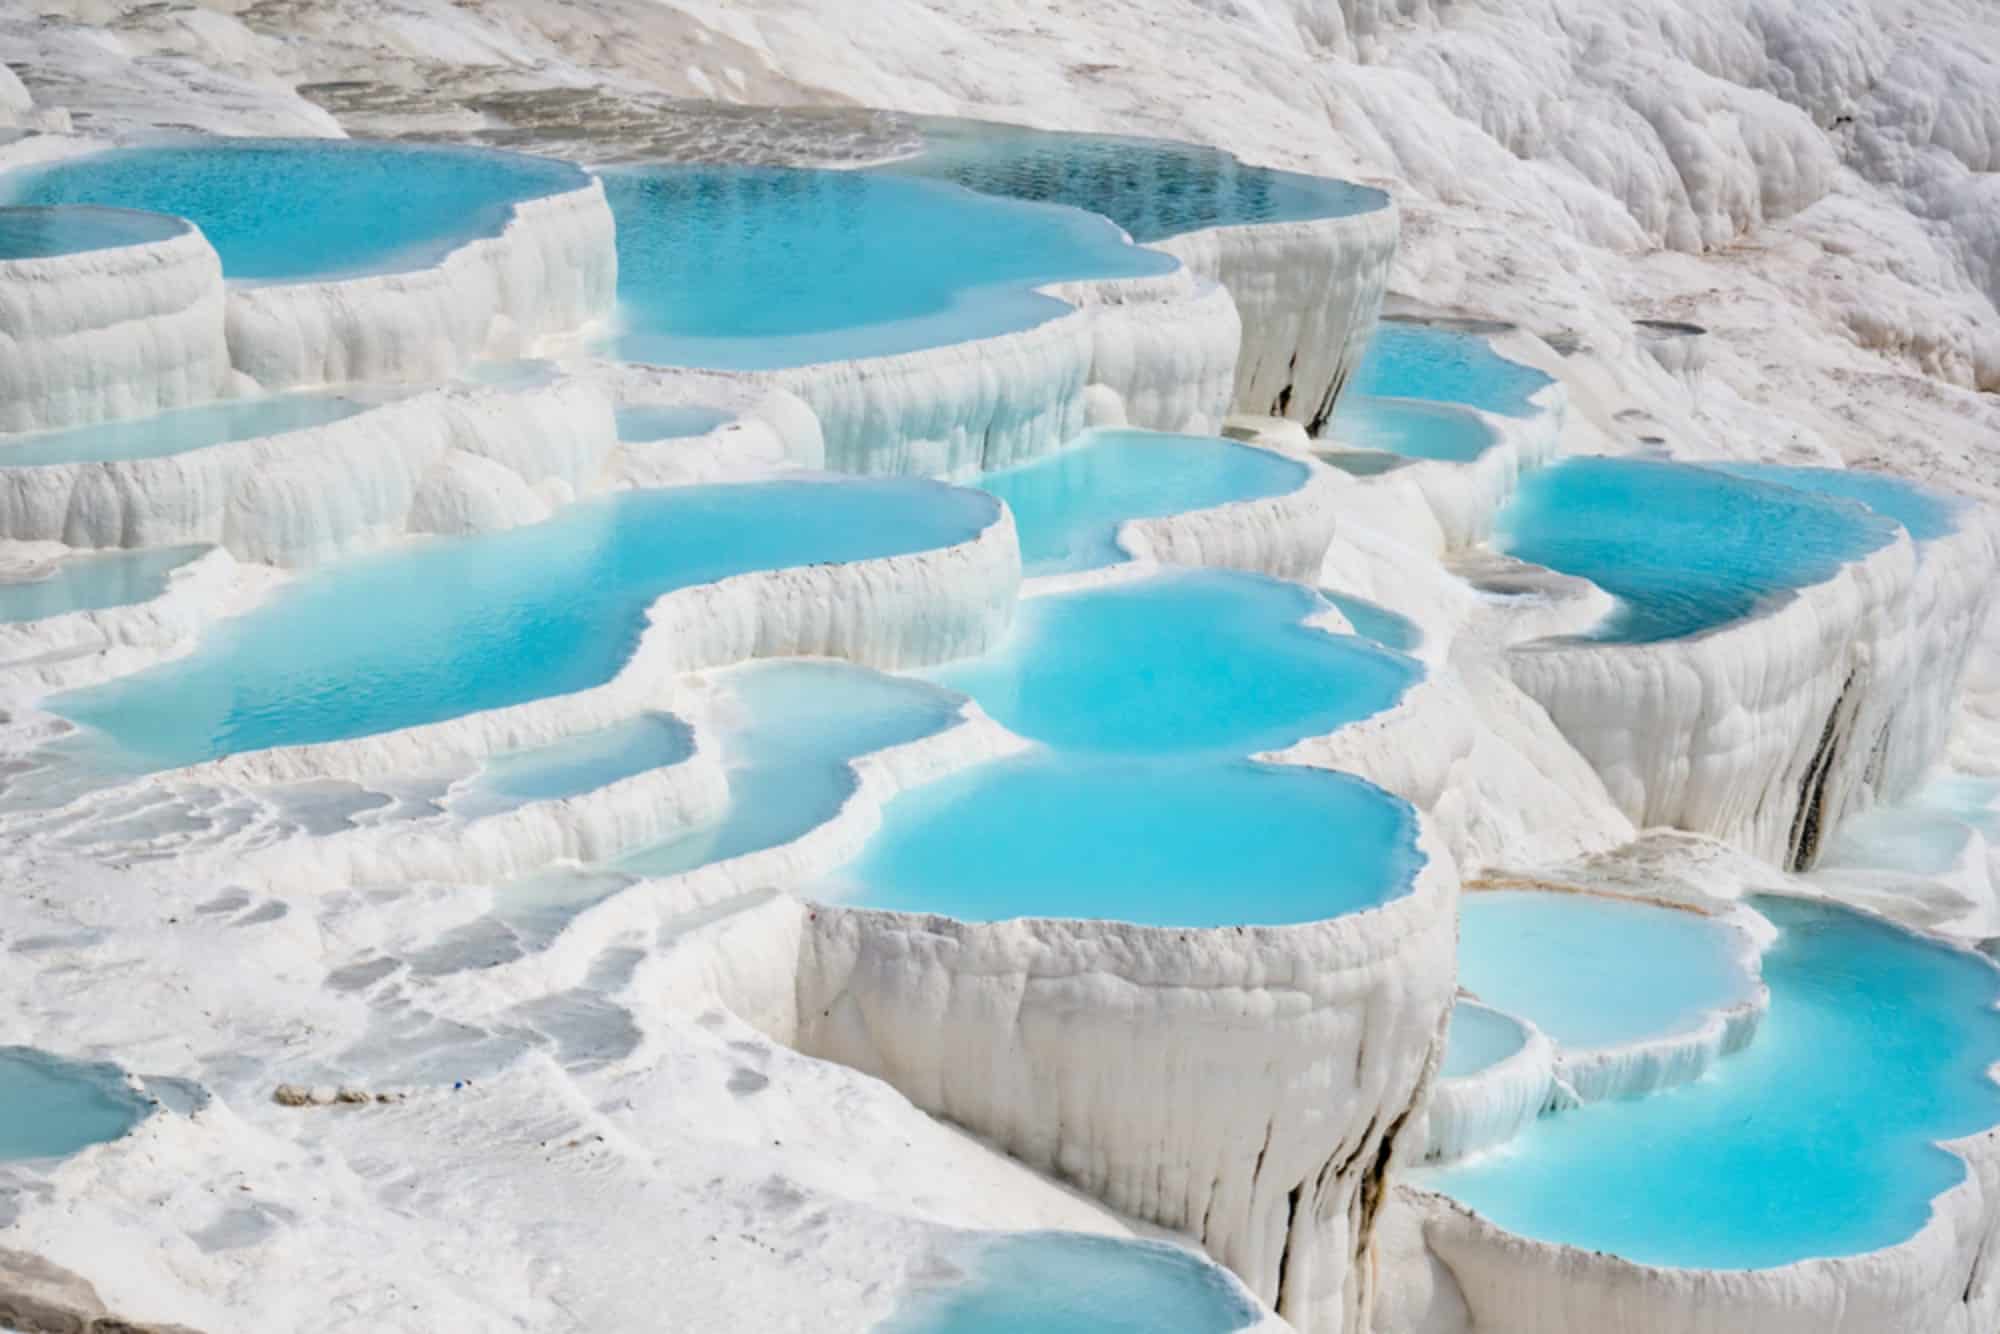 Natural travertine pools and terraces in Pamukkale - Turkey